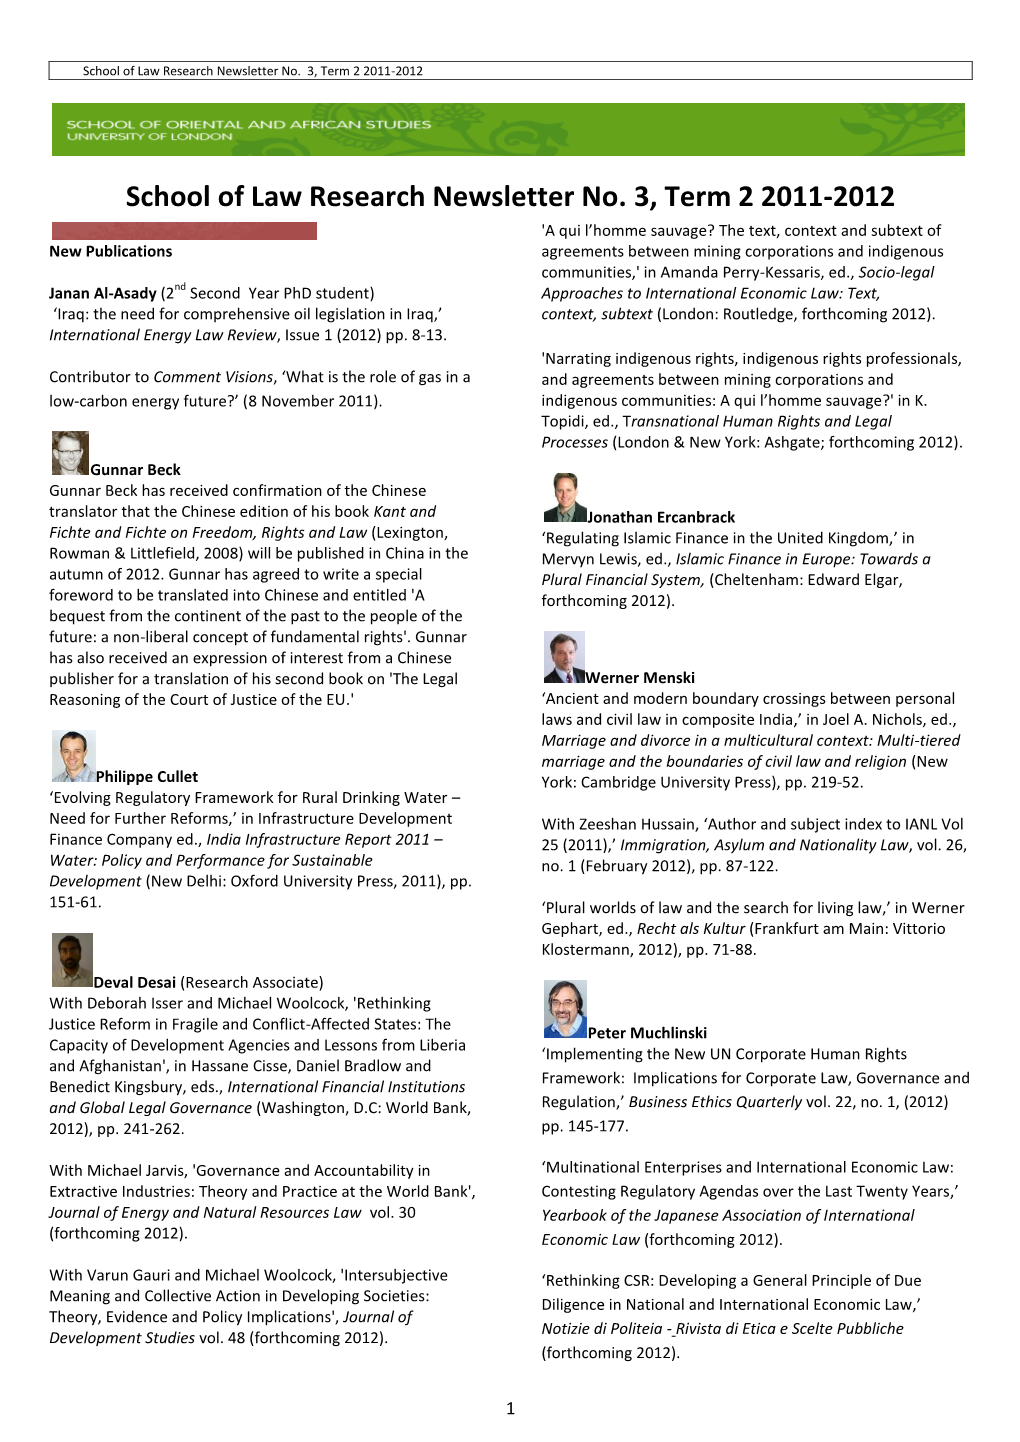 School of Law Research Newsletter No. 3, Term 2 2011-2012